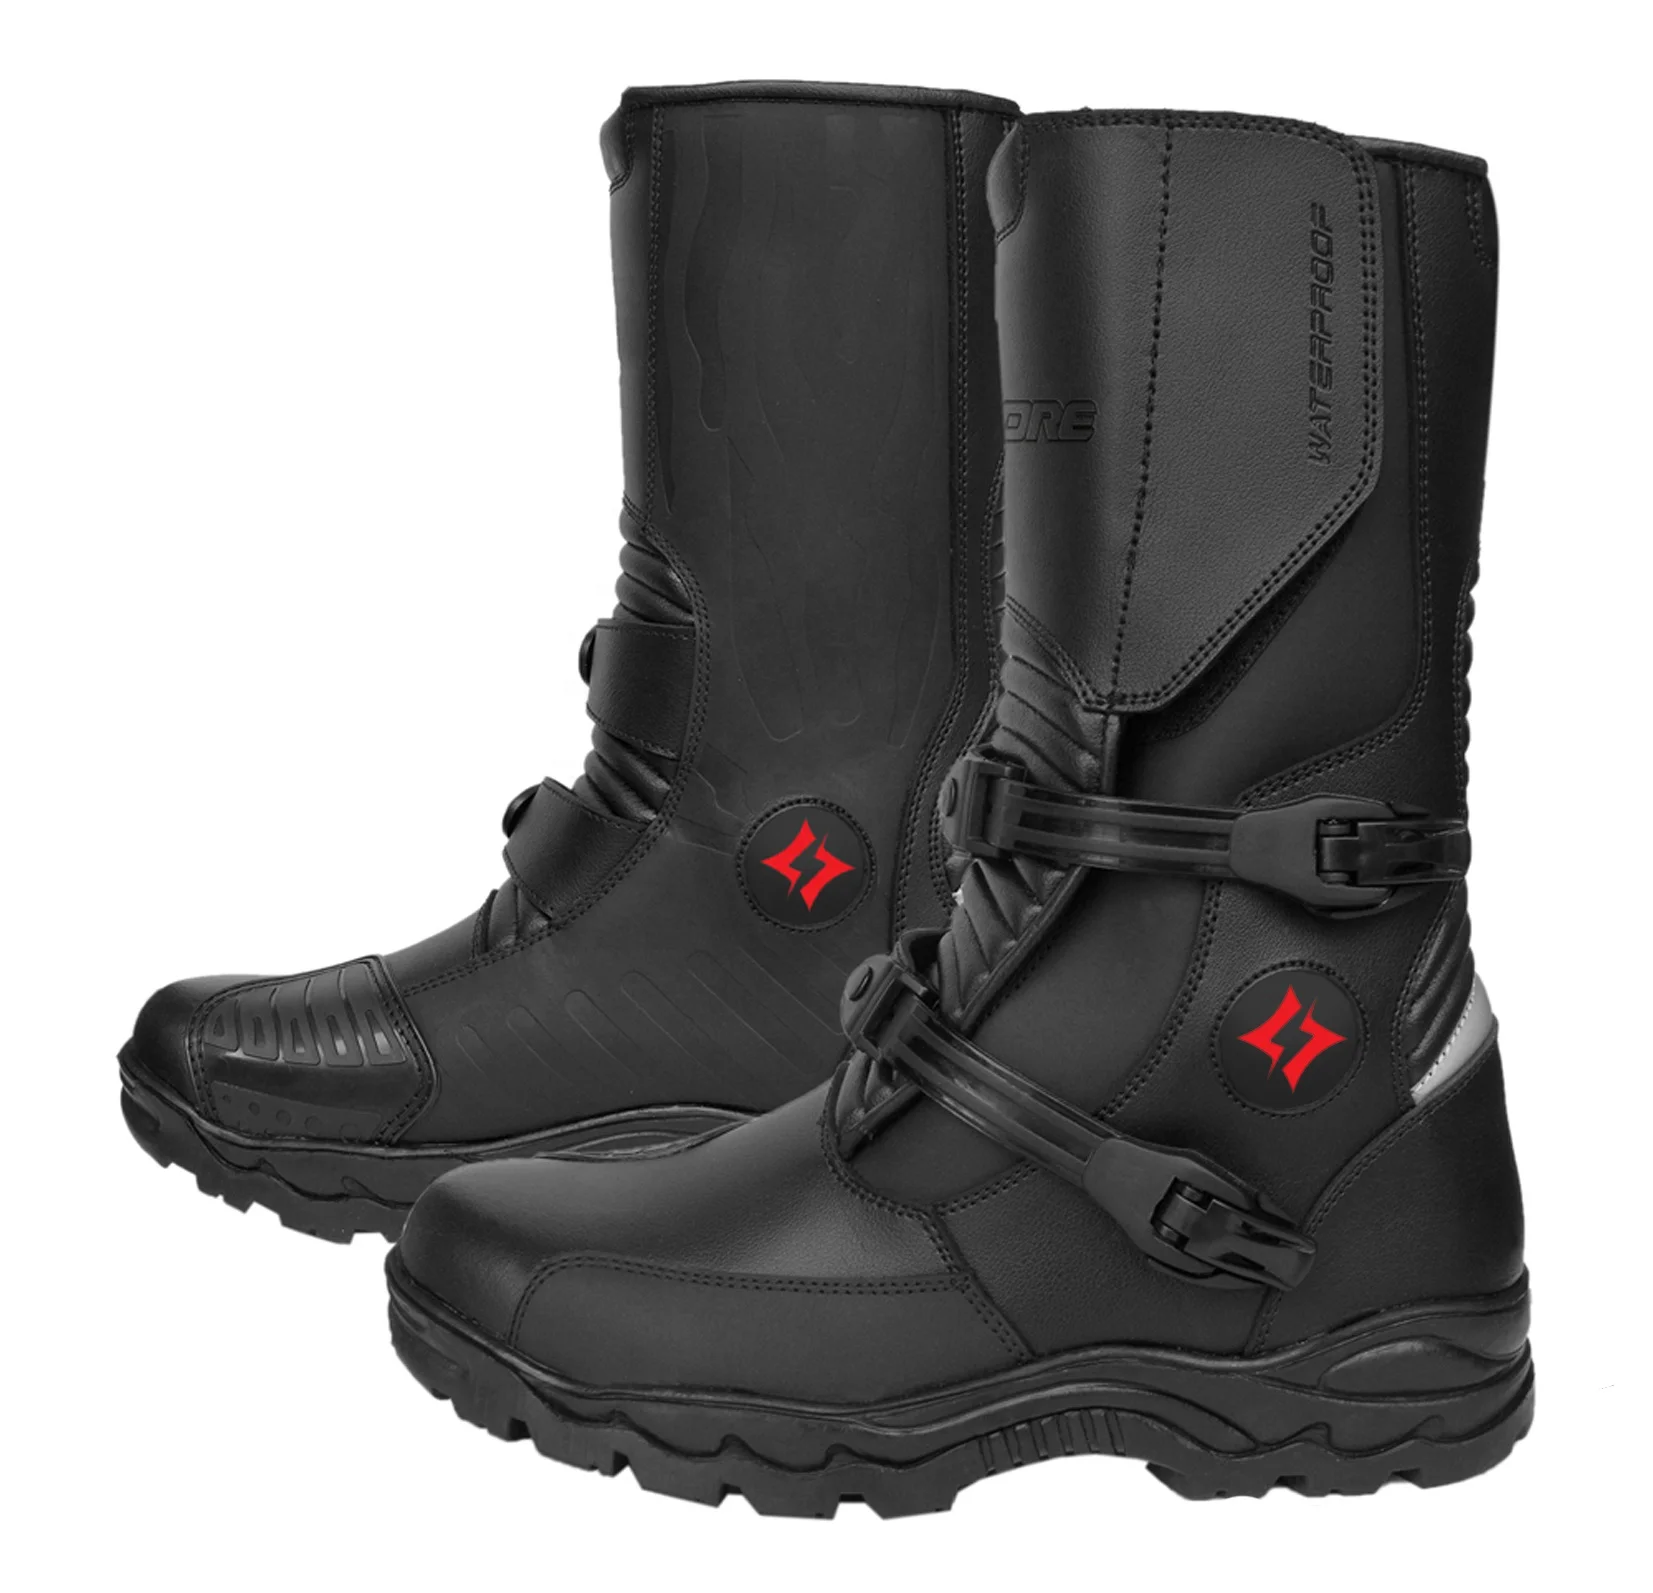 Buy > waterproof breathable boots > in stock